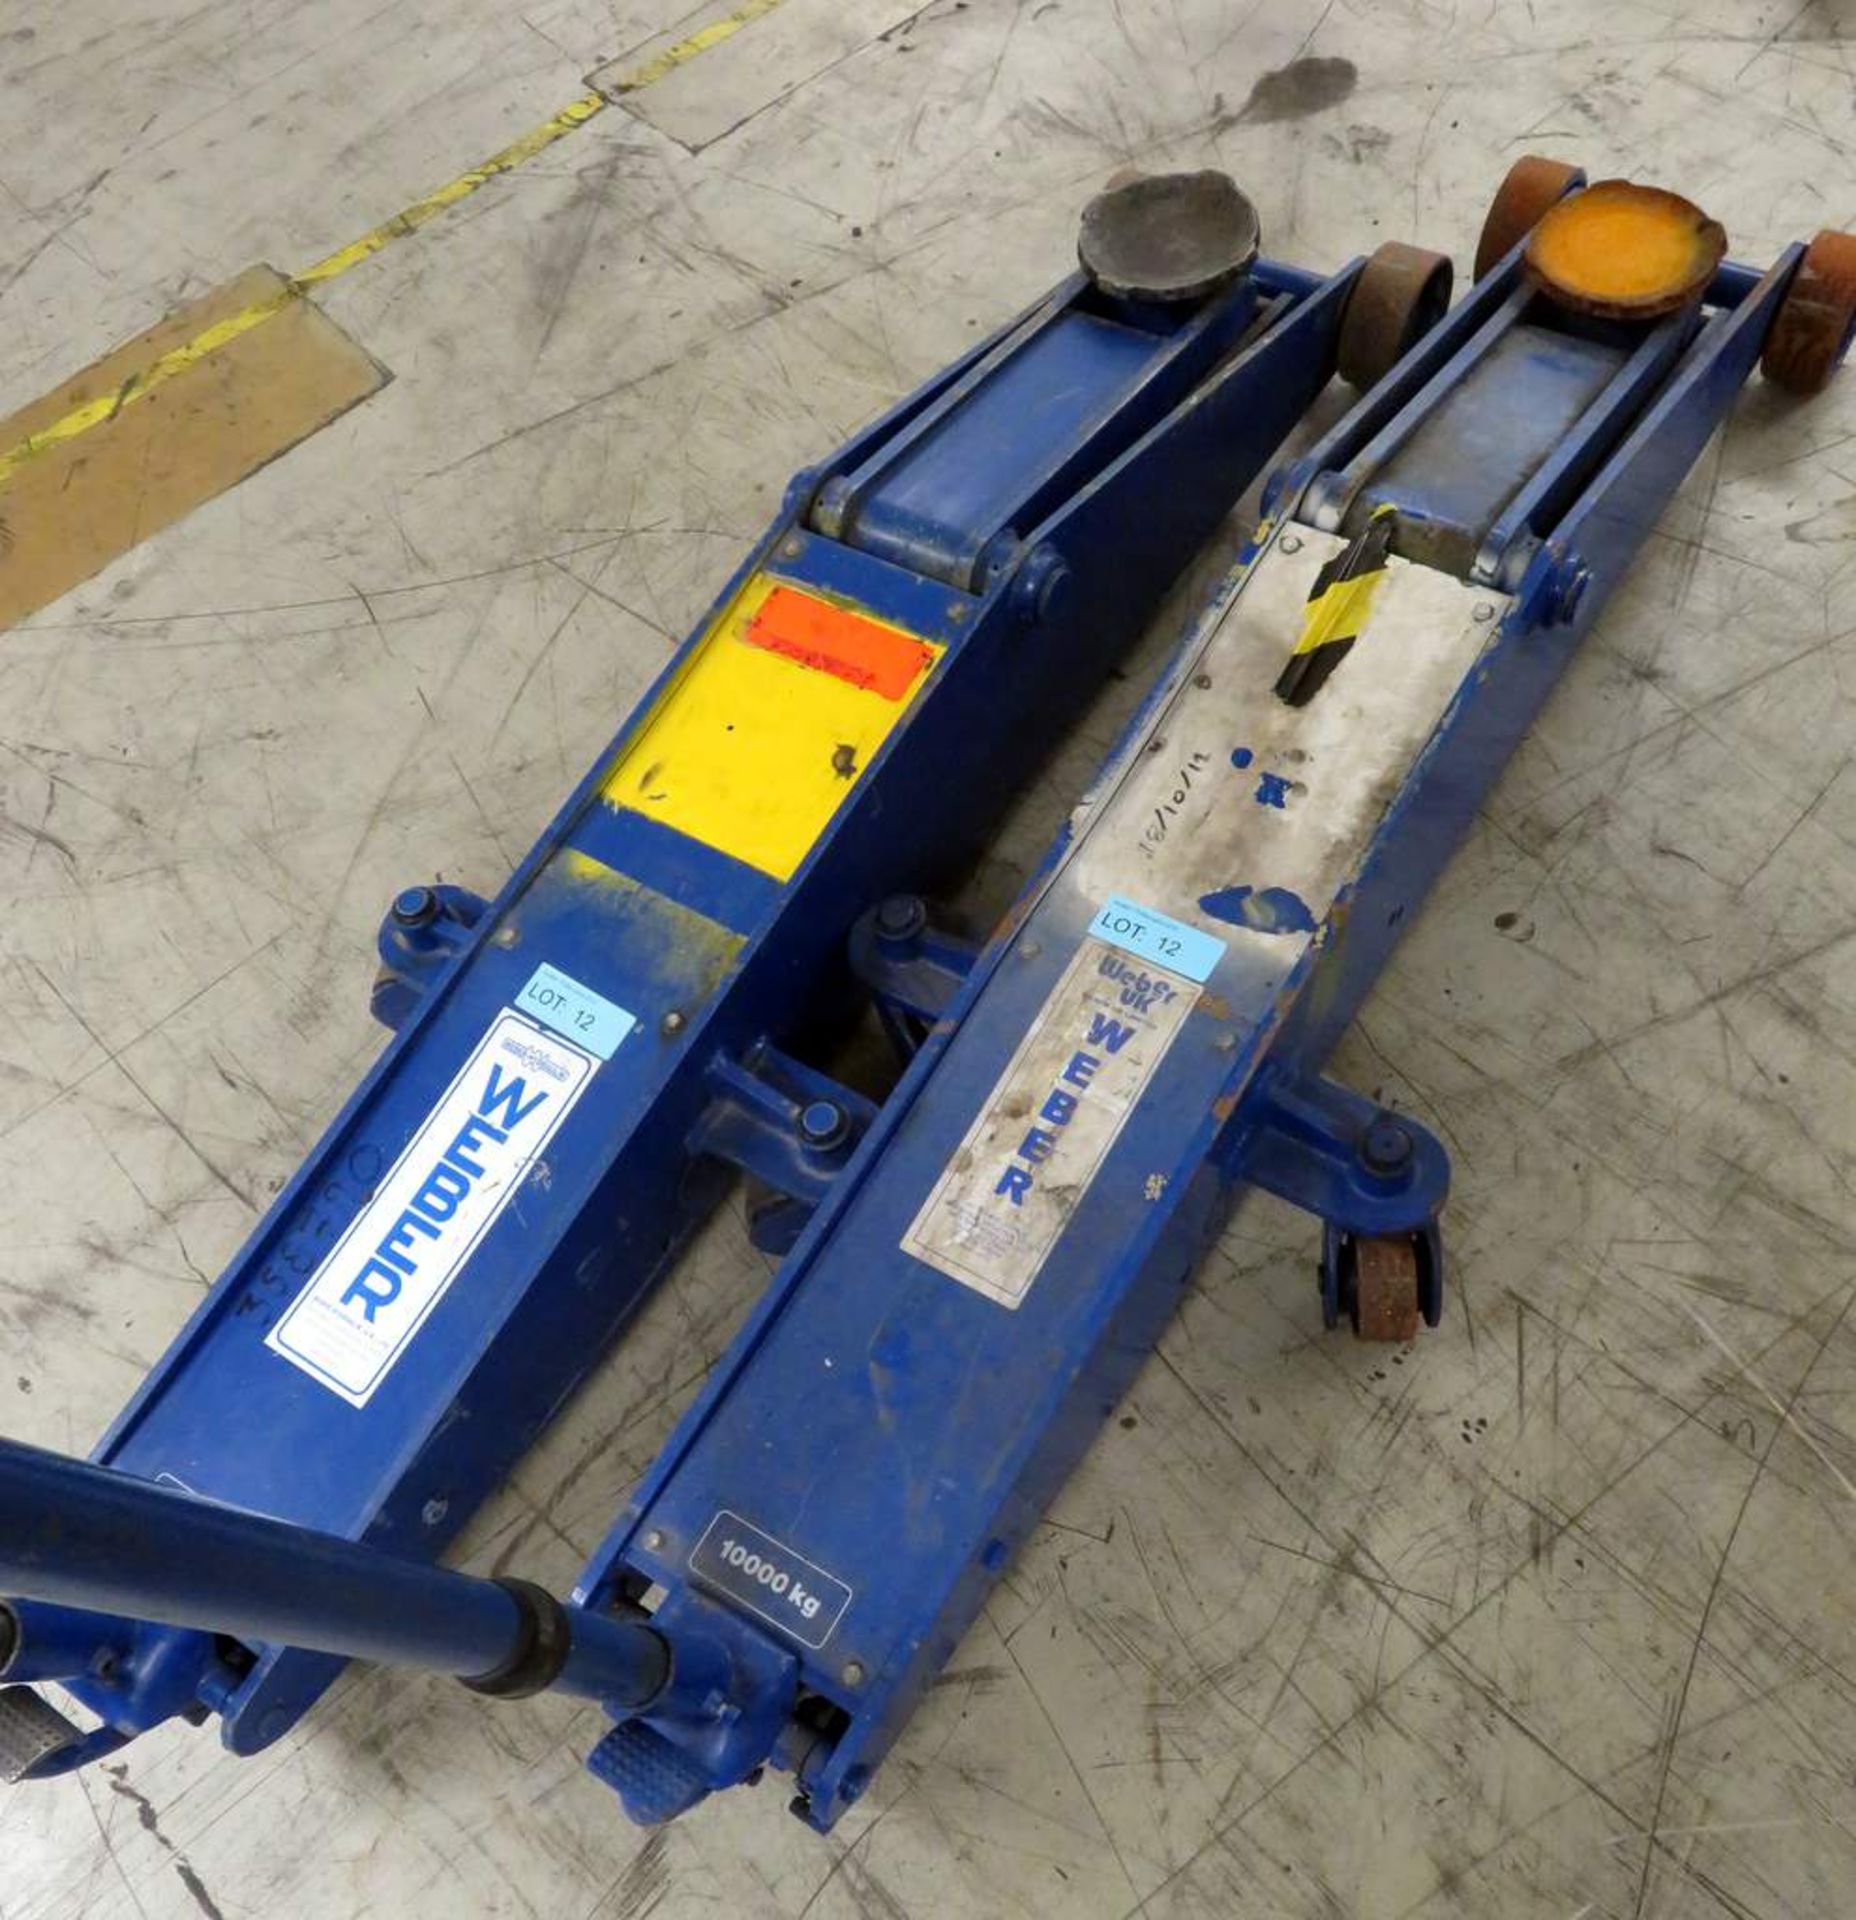 2x Weber 10 Tonne Vehicle Trolley Jacks Complete With Handle - WDK100LQ - Working Condition - Image 3 of 9